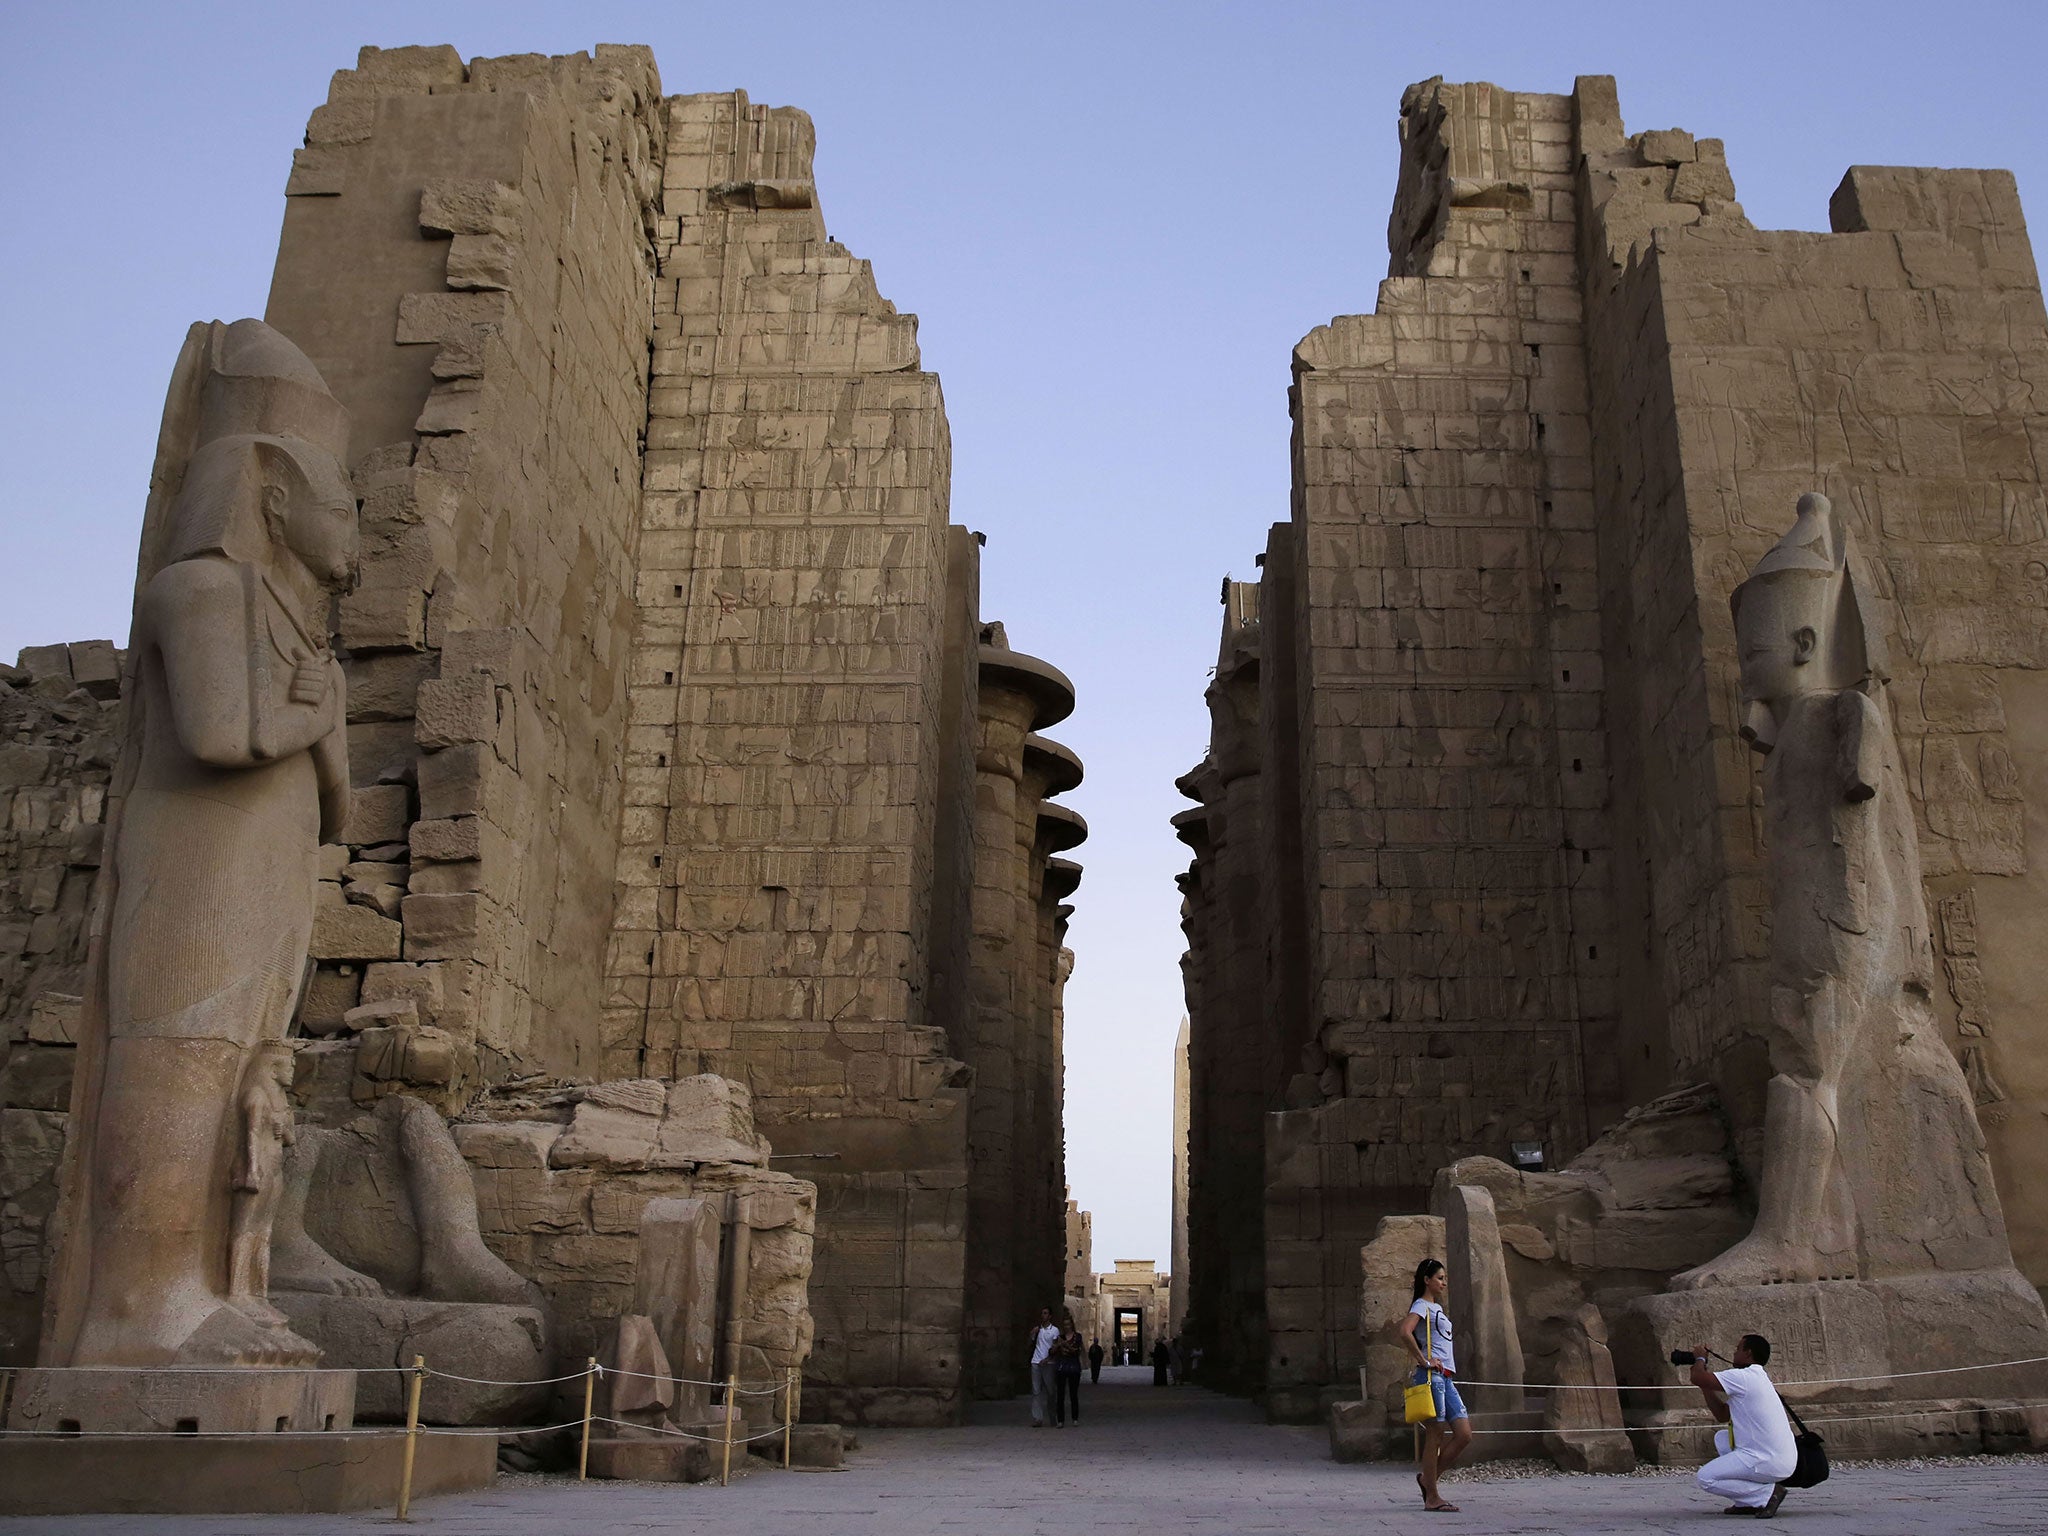 Millions of tourists visit the Temple of Karnak every year